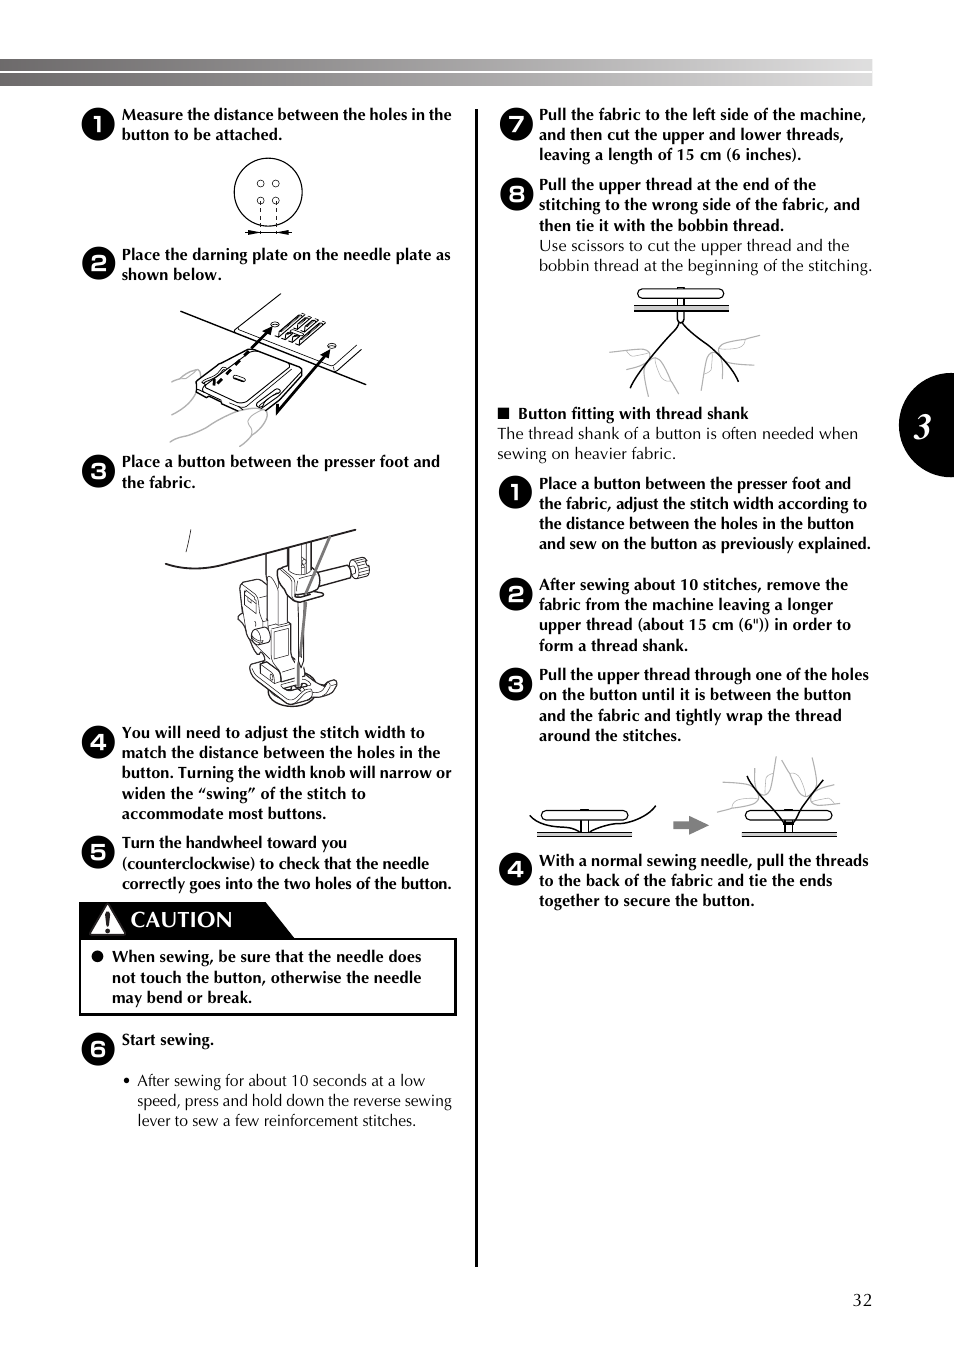 Caution | Brother LS2350 User Manual | Page 33 / 96